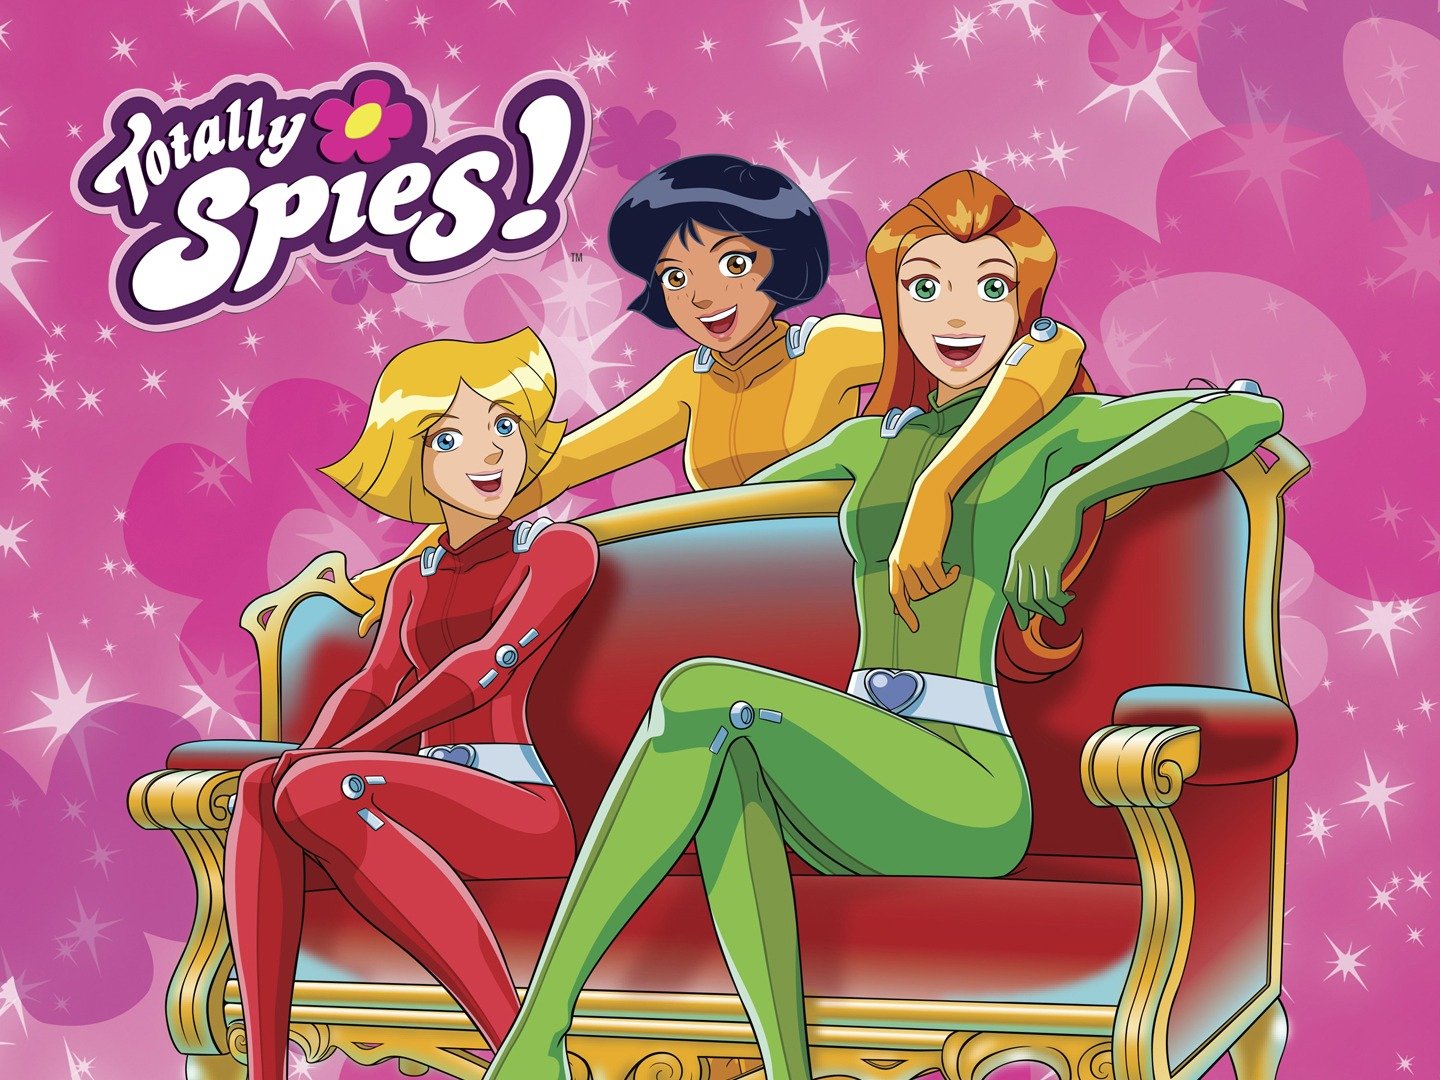 Girl Spies Cartoon Porn Movies - Totally Spies! - Rotten Tomatoes